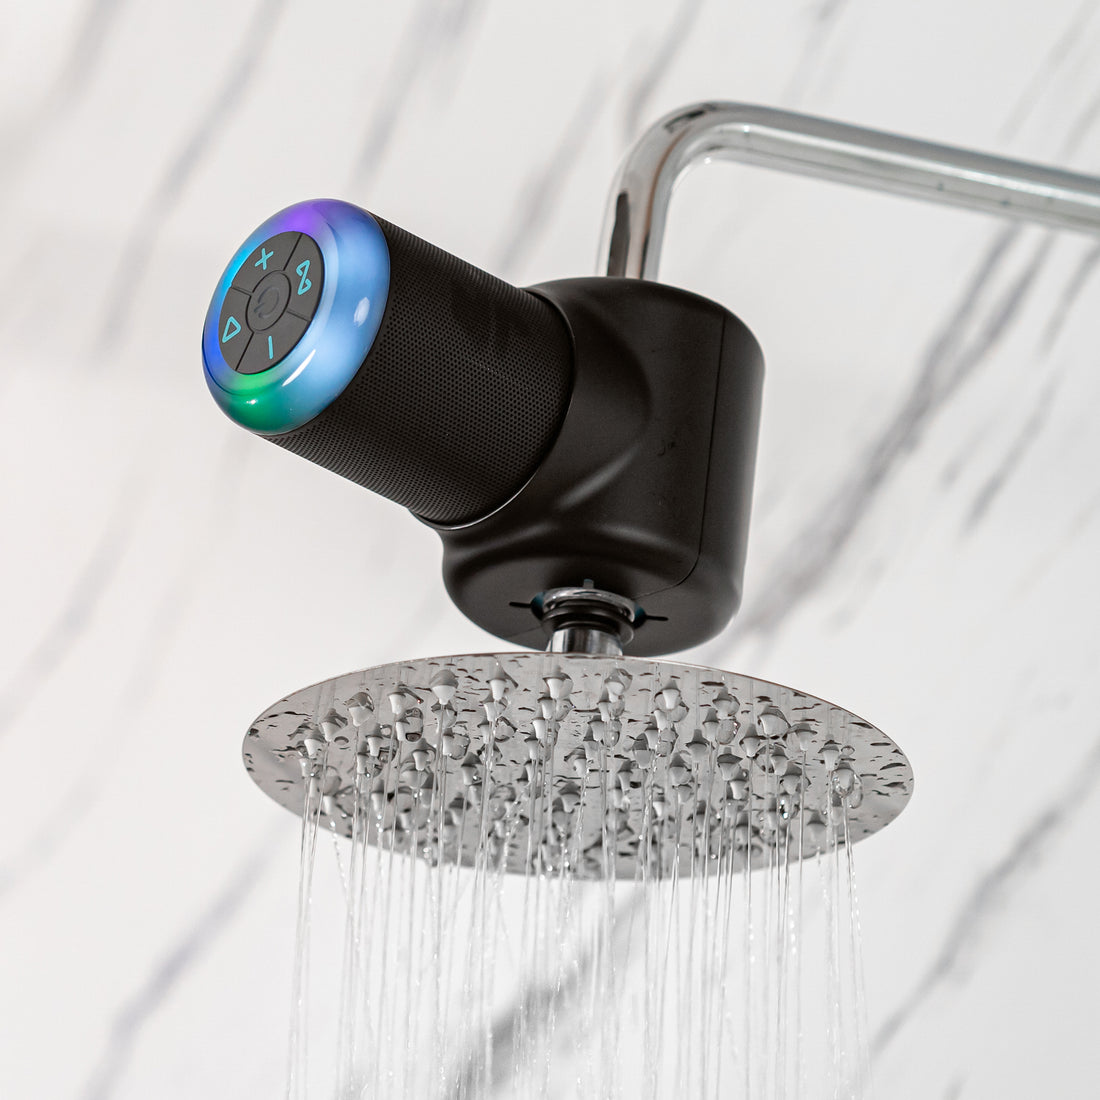 Shower Power Pro: The Hydropower Shower Speaker with LED Lights